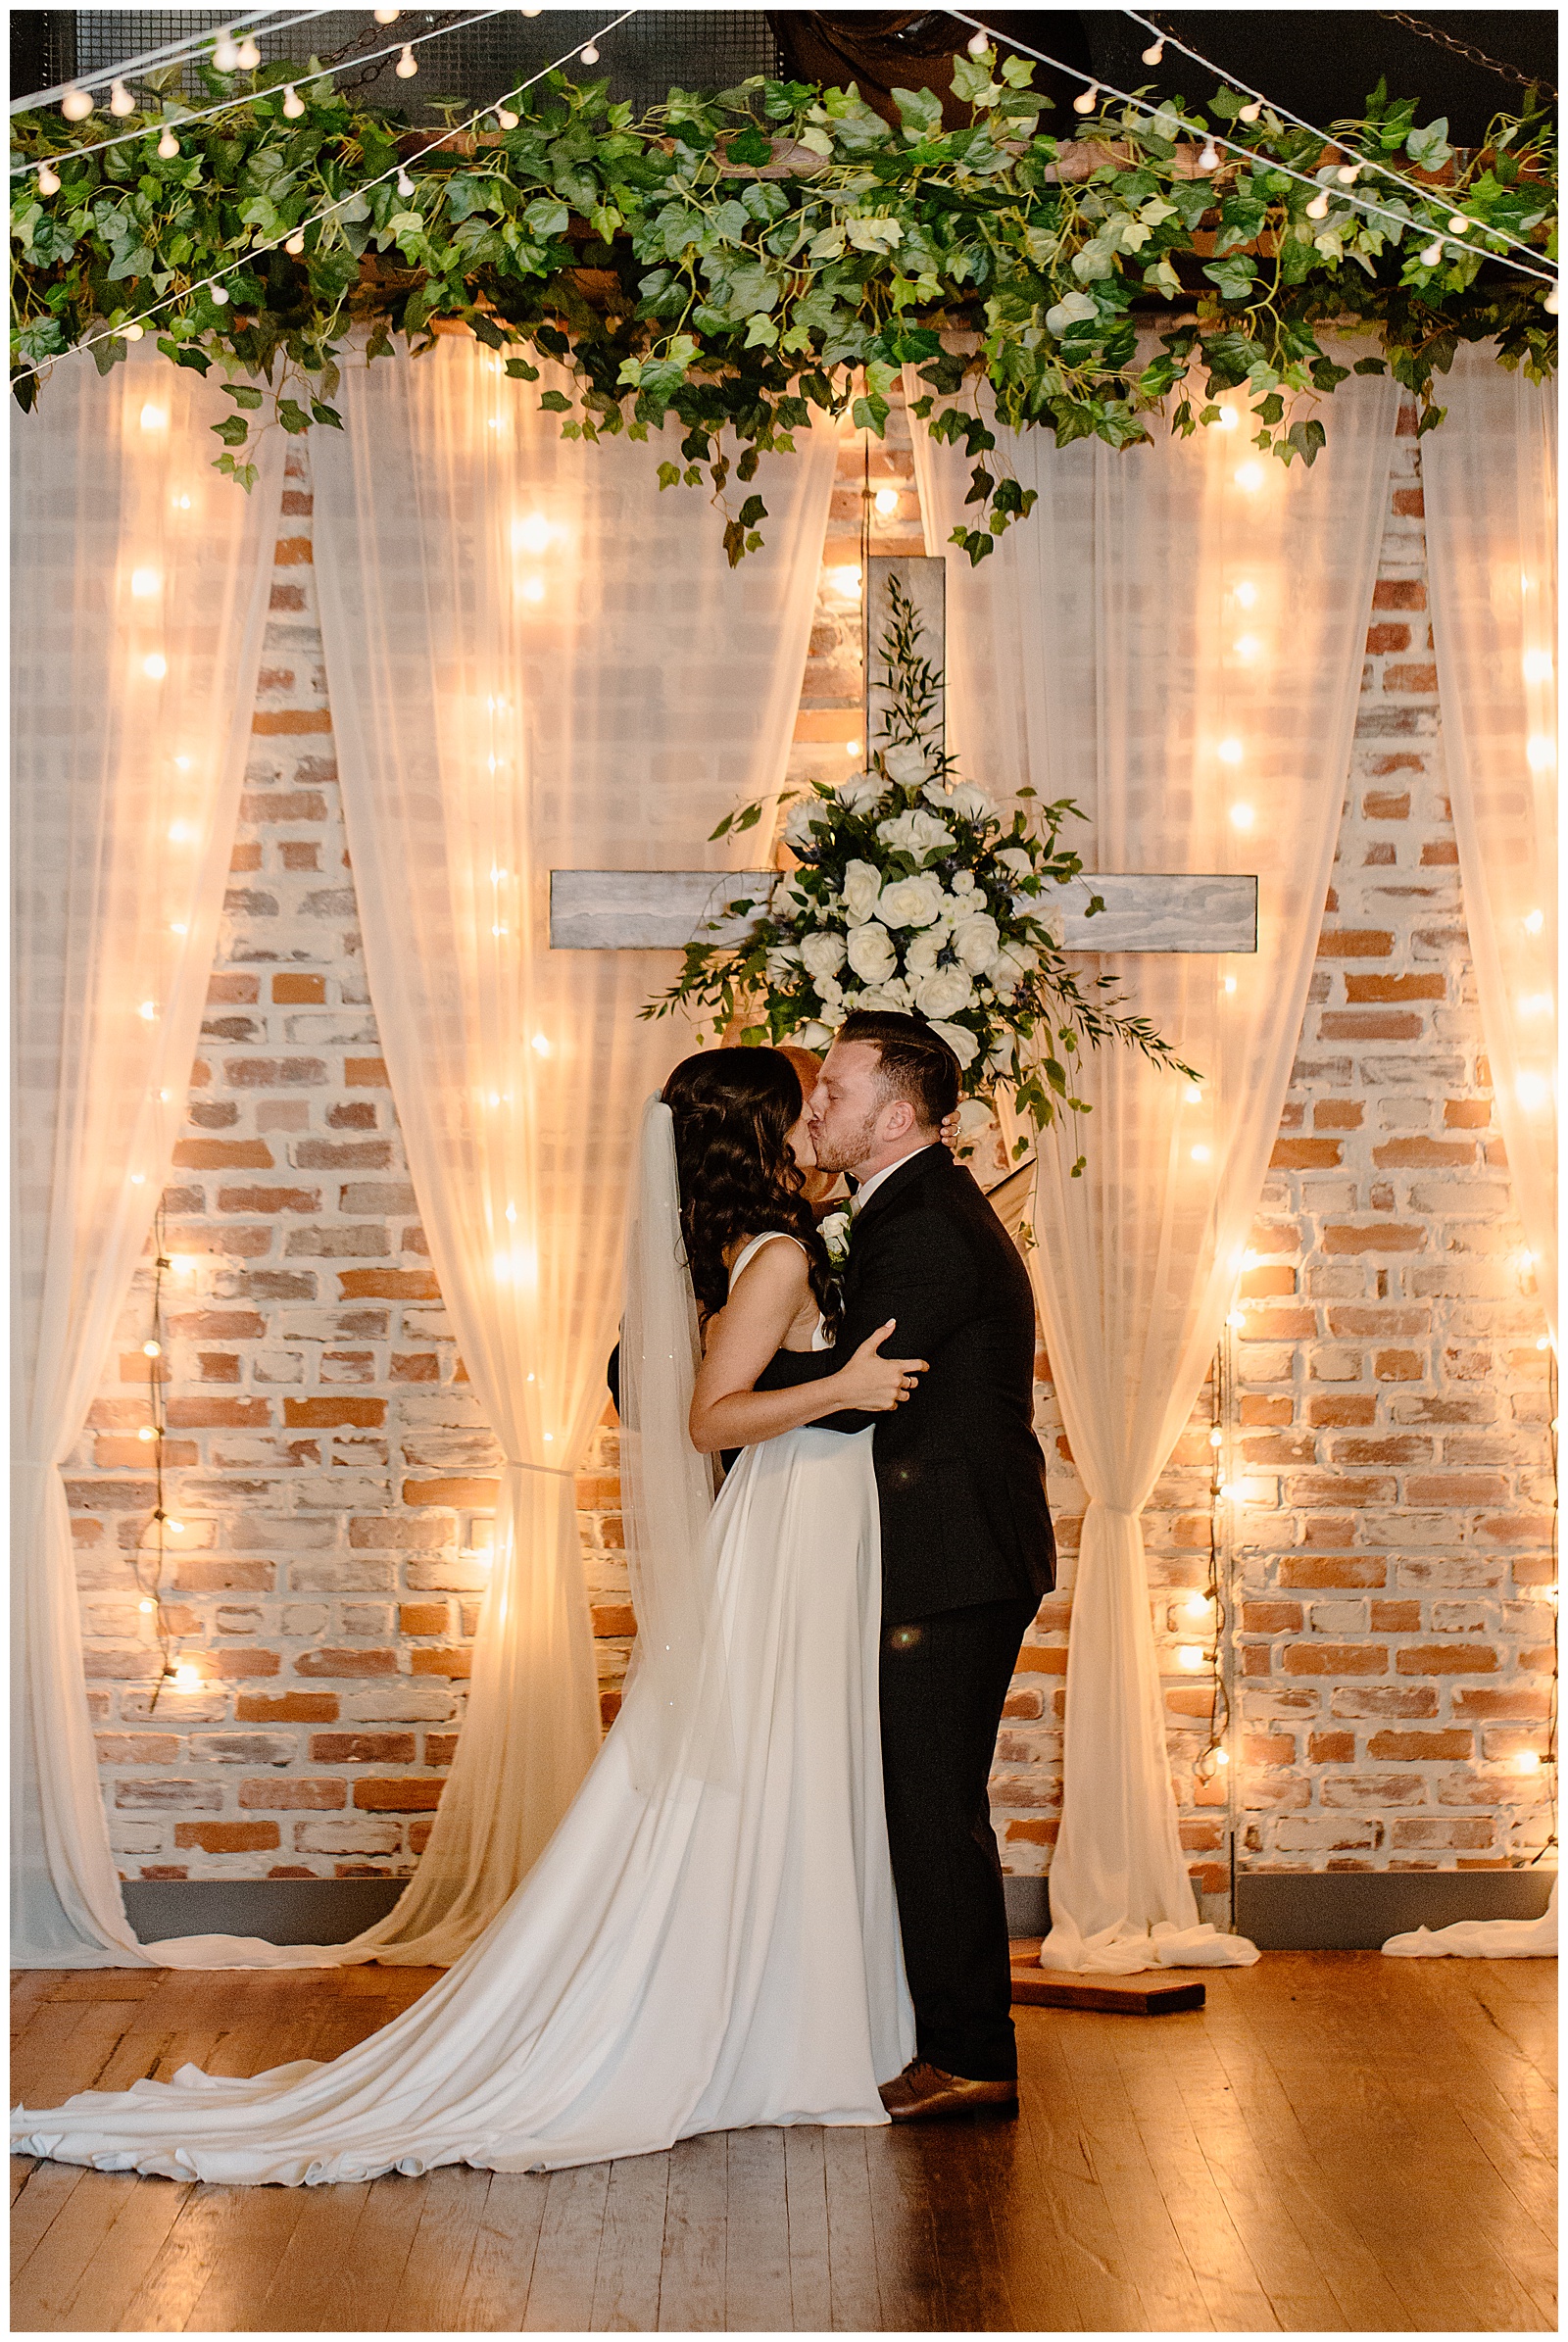 Bride and groom's first kiss as husband and wife, their modern Winston-Salem summer wedding